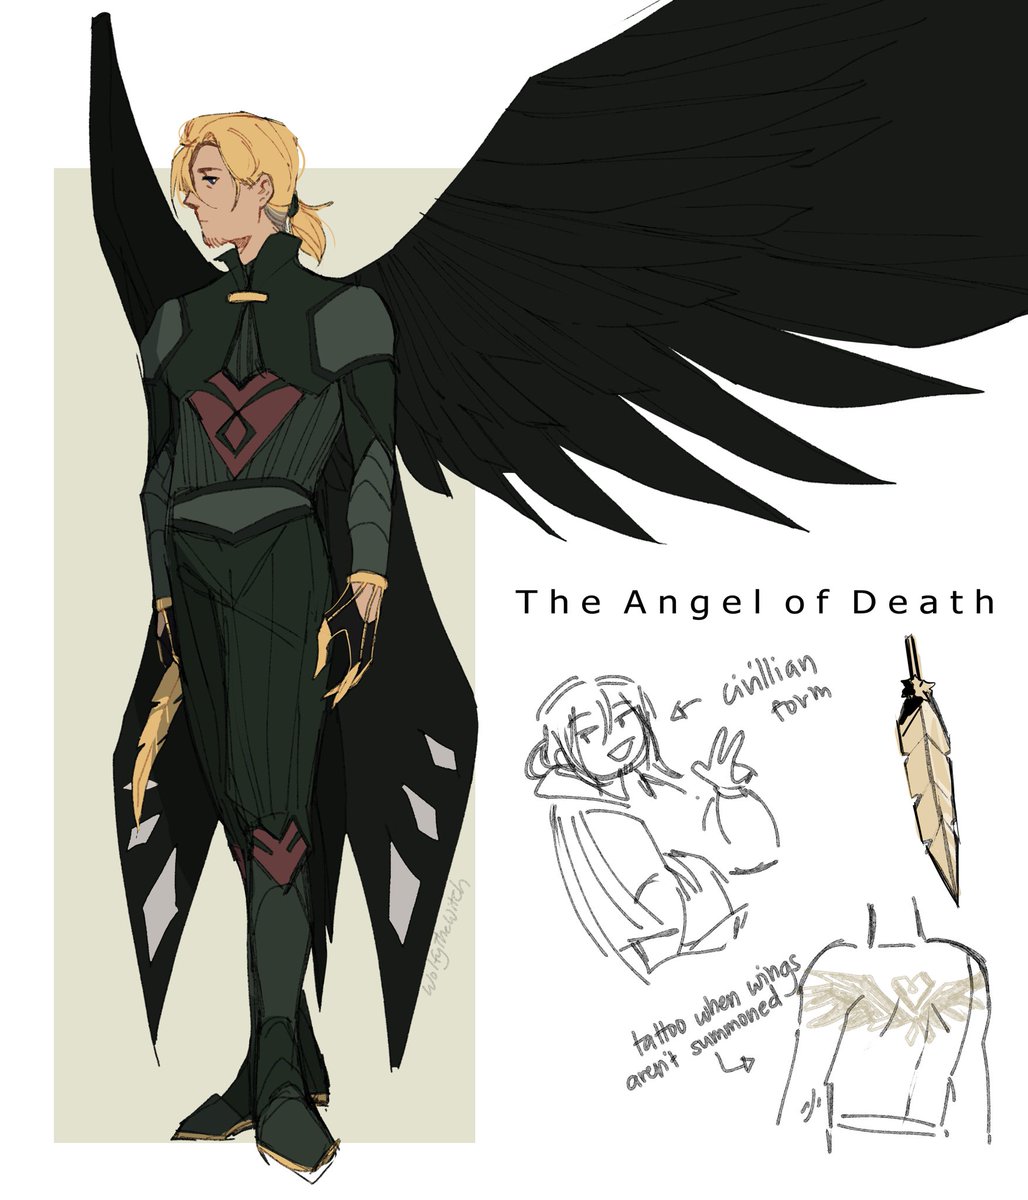 // Farewell Wanderlust (AU)

The Angel of Death

Status: rogue 

Former alias: Crowfather 

Abilities: Flight. Plucked feathers turns gold, doubling as daggers or throwing knives. 

#philzafanart 